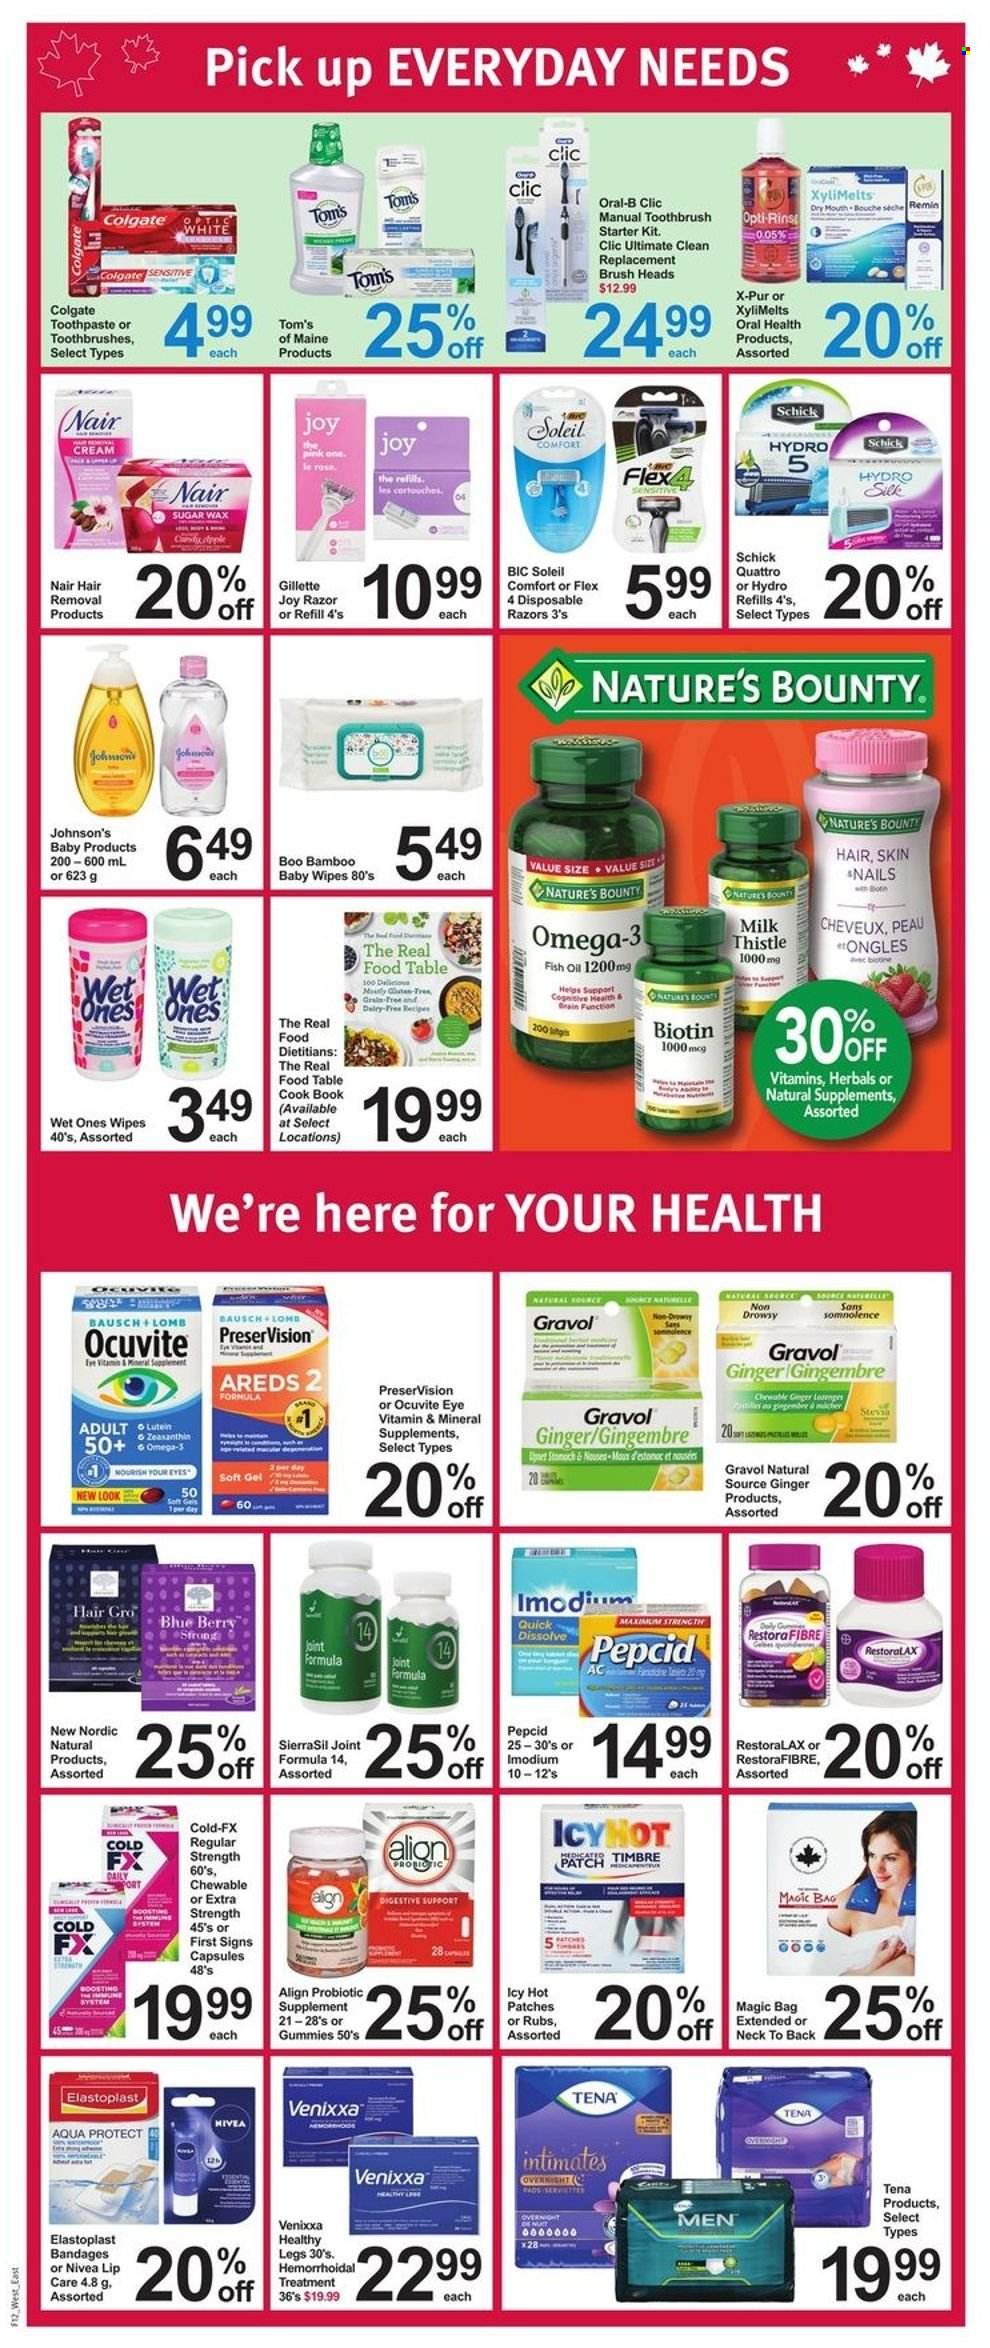 thumbnail - Pharmasave Flyer - March 24, 2023 - March 30, 2023 - Sales products - ginger, milk, Silk, sugar, rosé wine, wipes, baby wipes, Johnson's, Nivea, Joy, toothbrush, toothpaste, sanitary pads, Gillette, BIC, razor, Schick, hair removal, disposable razor, serviettes, book, Biotin, fish oil, Nature's Bounty, Pepcid, Omega-3, Colgate, Imodium, Oral-B, Ocuvite, Tena Lady. Page 3.